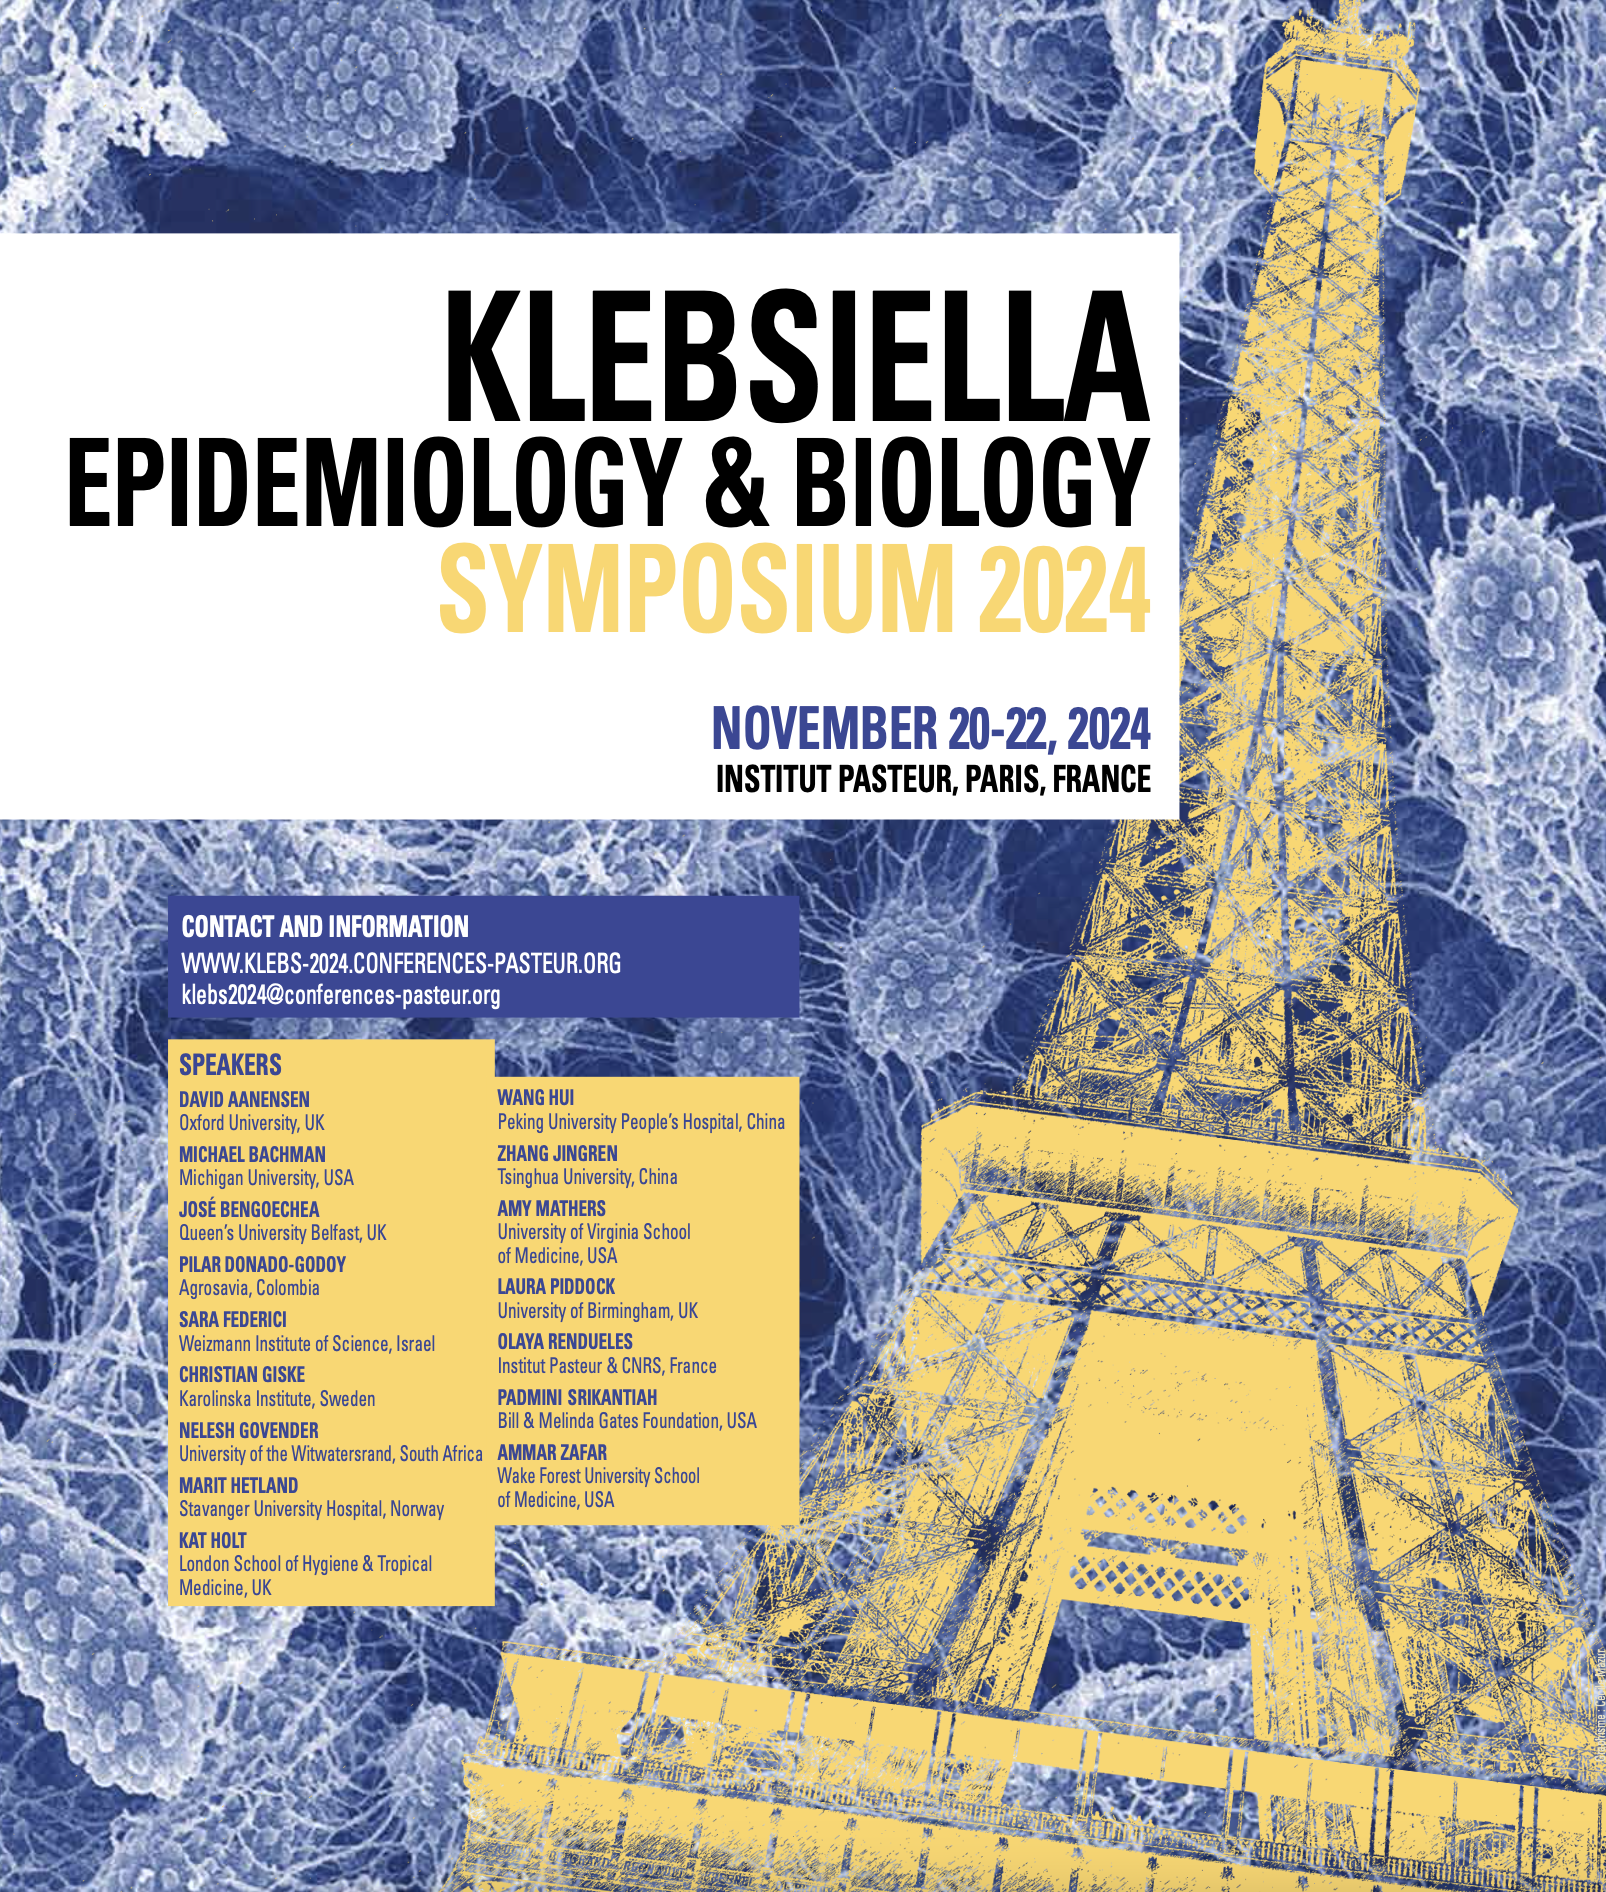 SAVE THE DATE: 1st Klebsiella Epidemiology and Biology Symposium (KLEBS) – 20th-22nd of November 2024